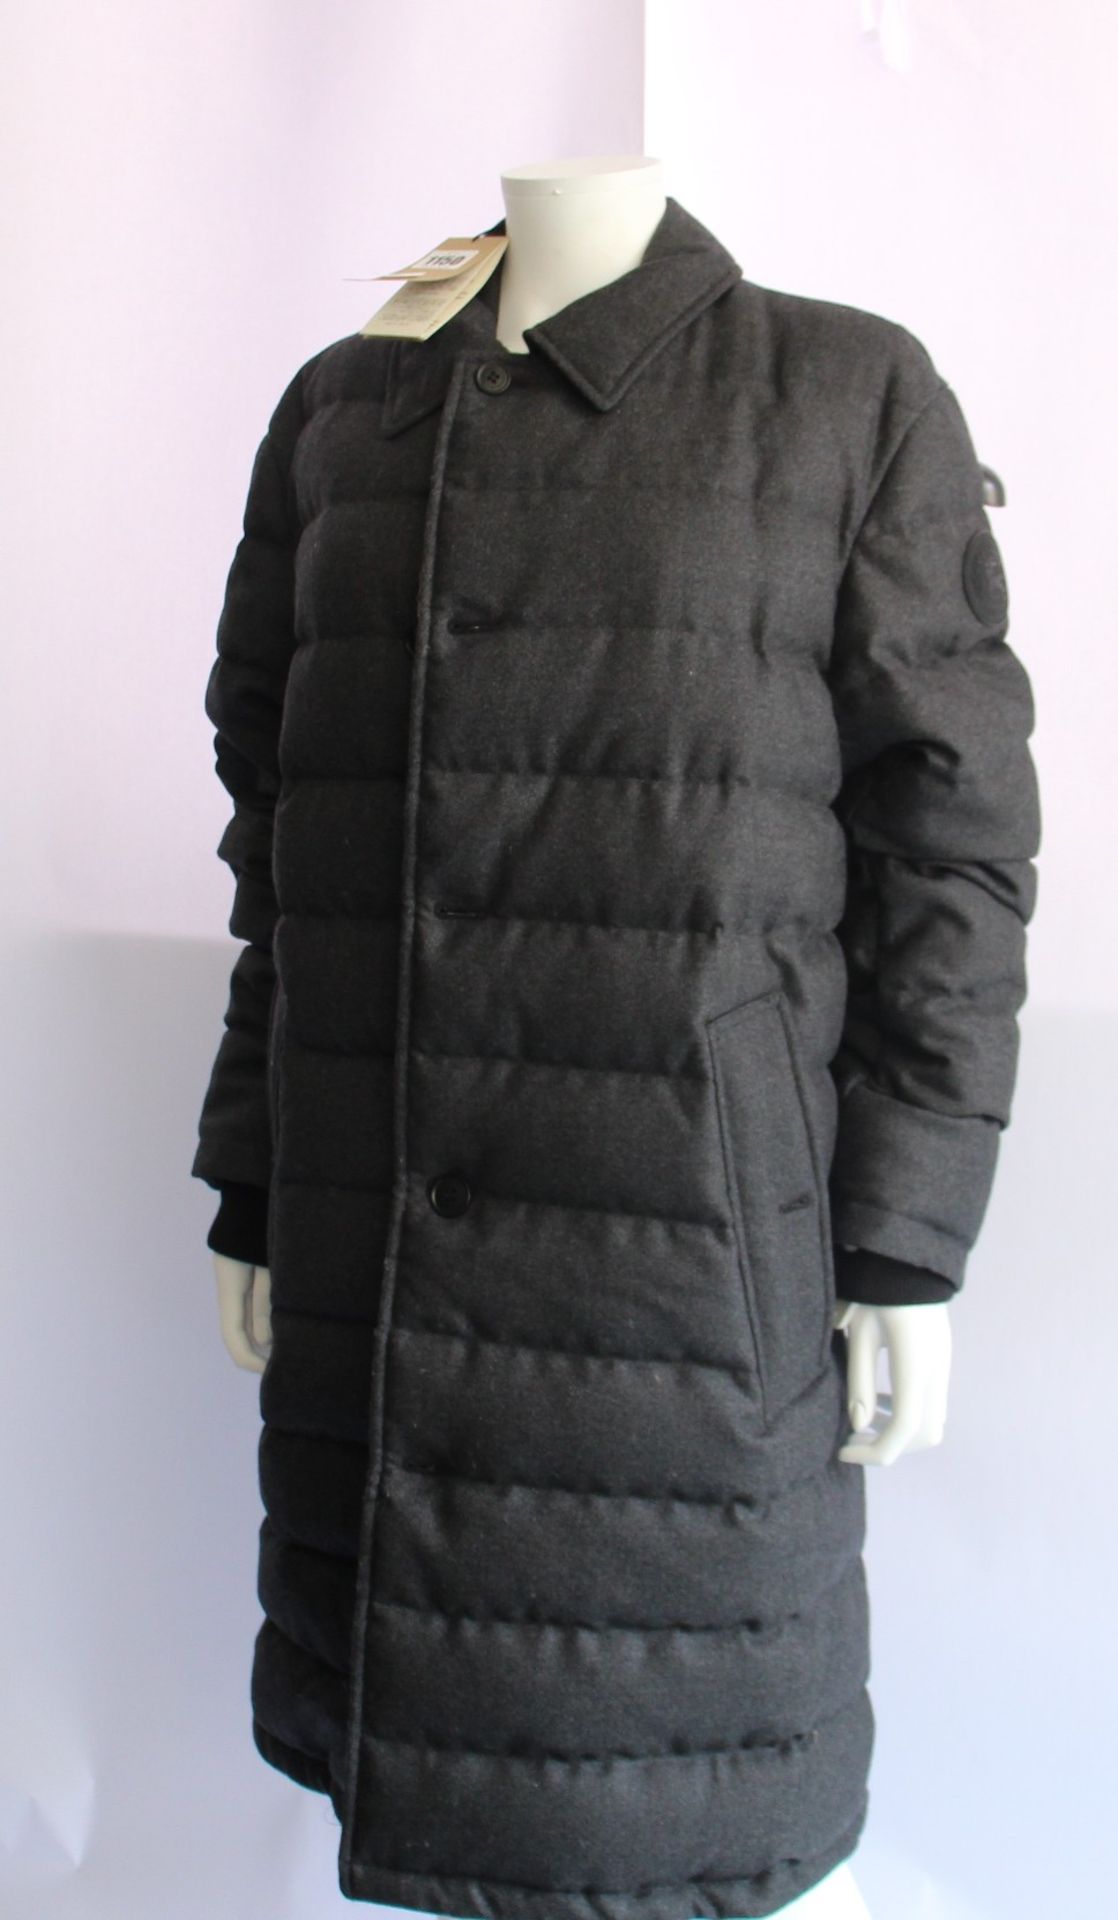 An as new Burberry Woodgate coat in dark grey (Size 54 - RRP £599).